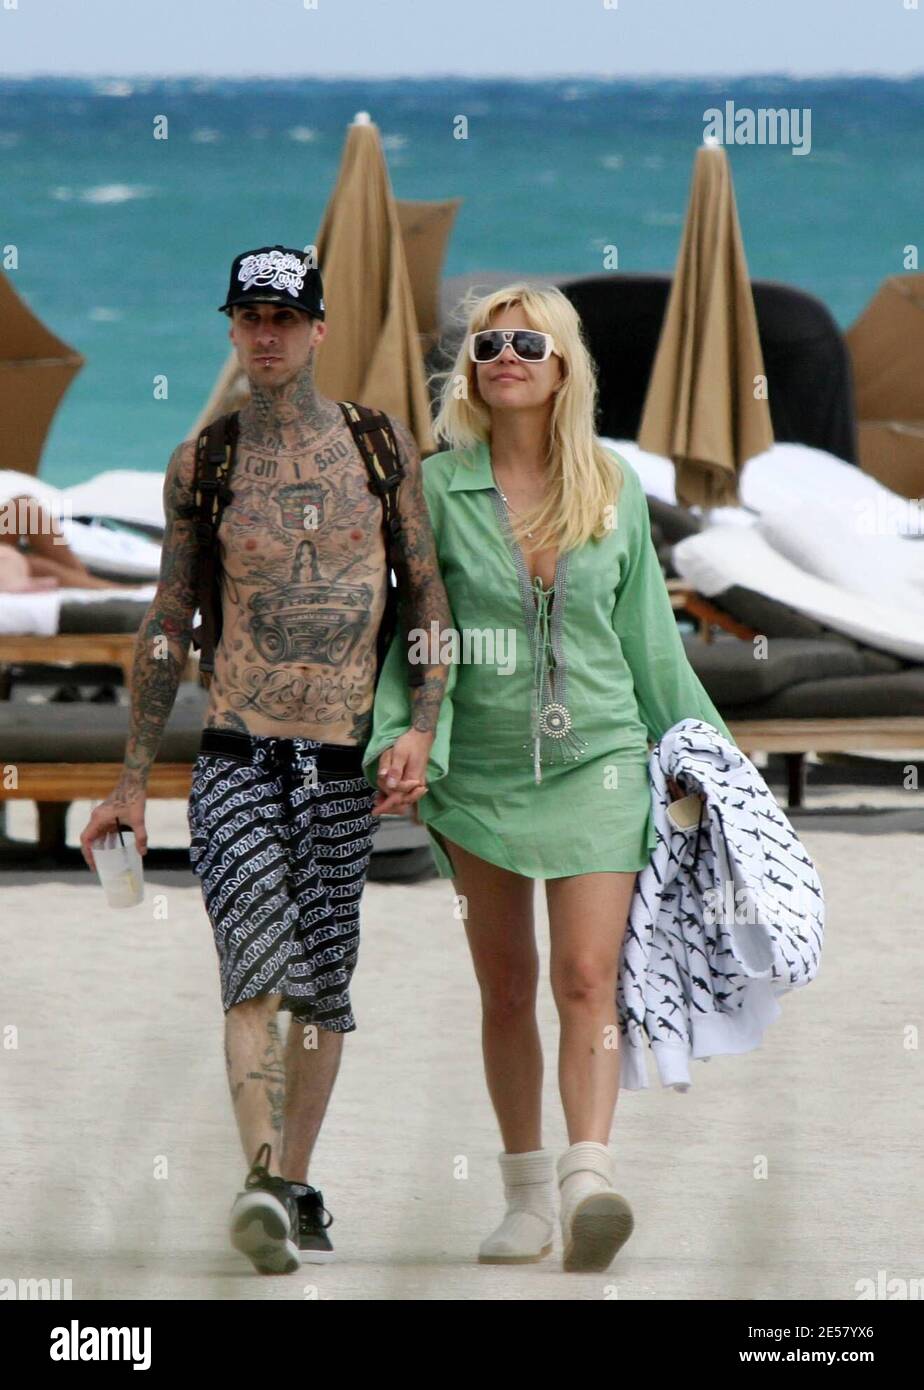 Exclusive!! Travis Barker and wife Shanna Moakler spend a second day on Miami Beach. The couple took a dip in the ocean and fooled around in their cabana before heading back to thier hotel, 3/19/07.    [[tag ccm]] Stock Photo